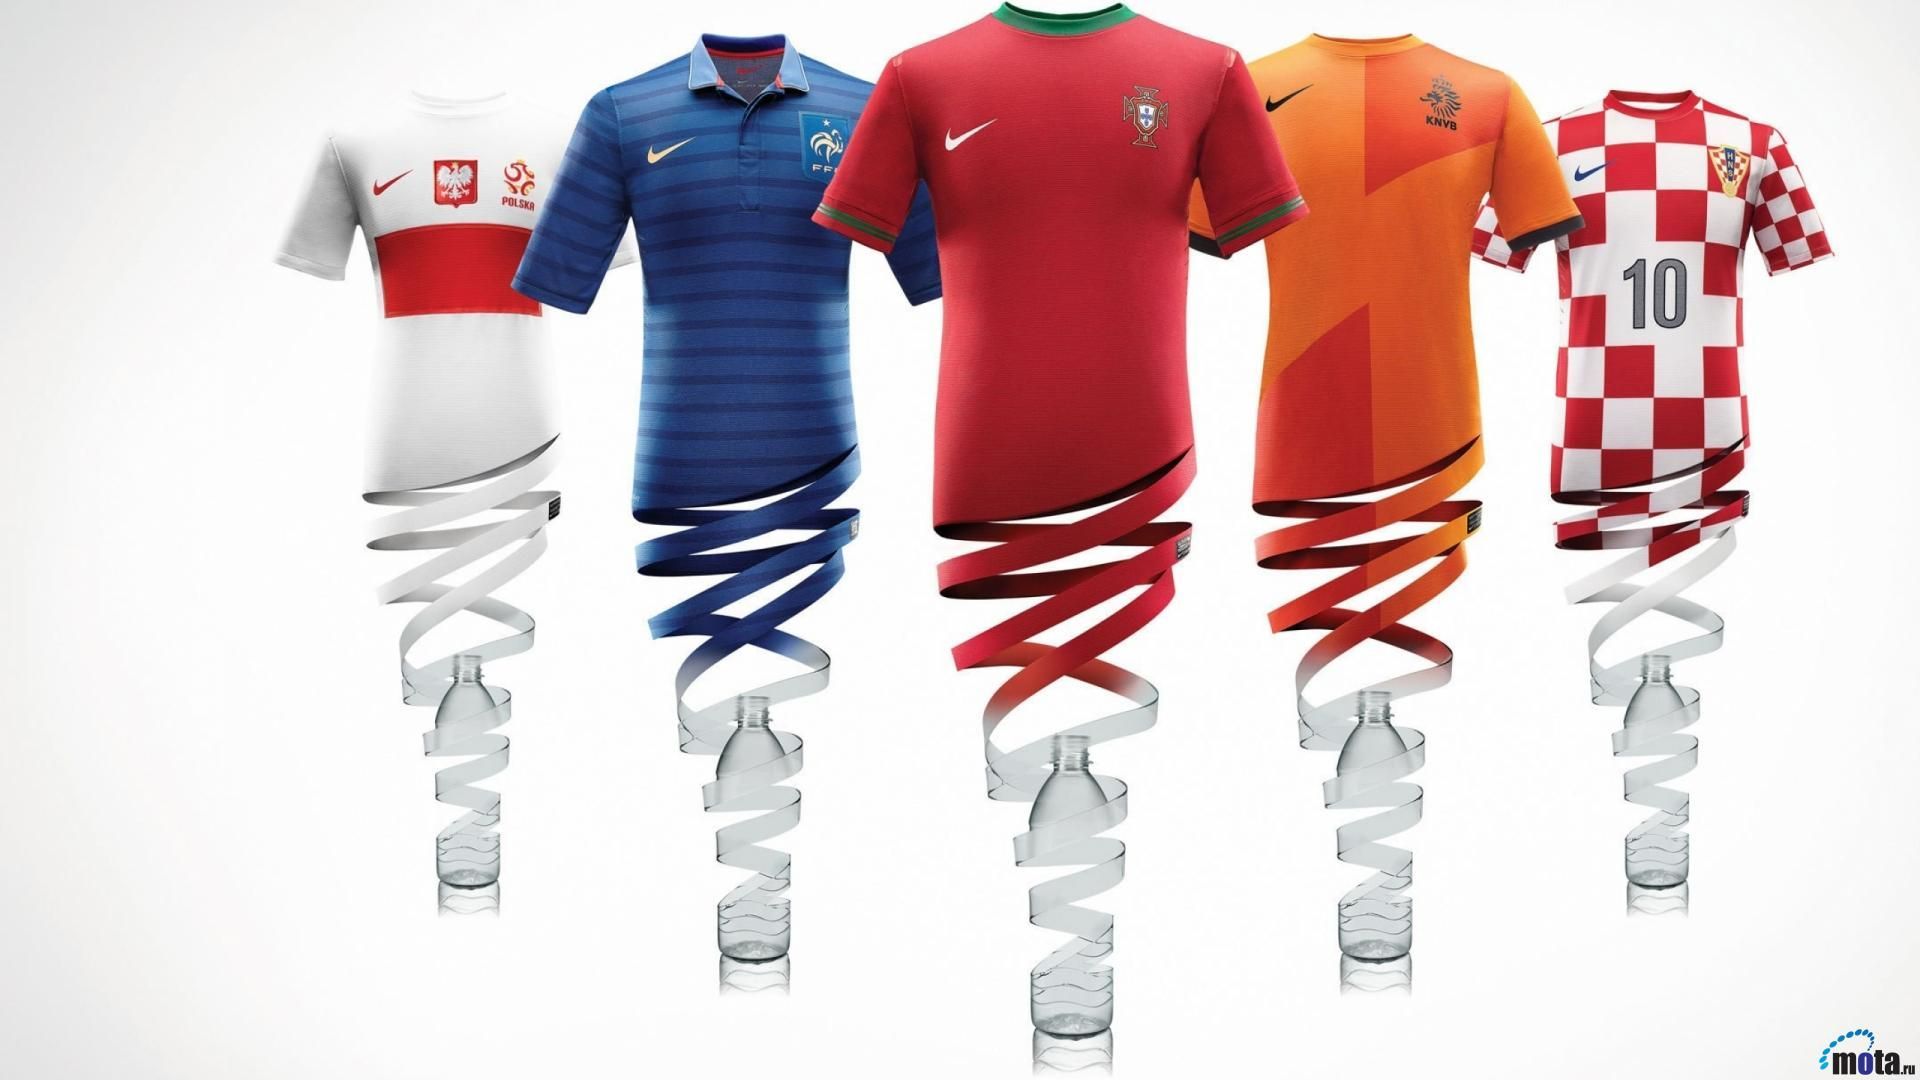 Download Wallpaper Euro 2012 football jersey by Nike 1920 x 1080